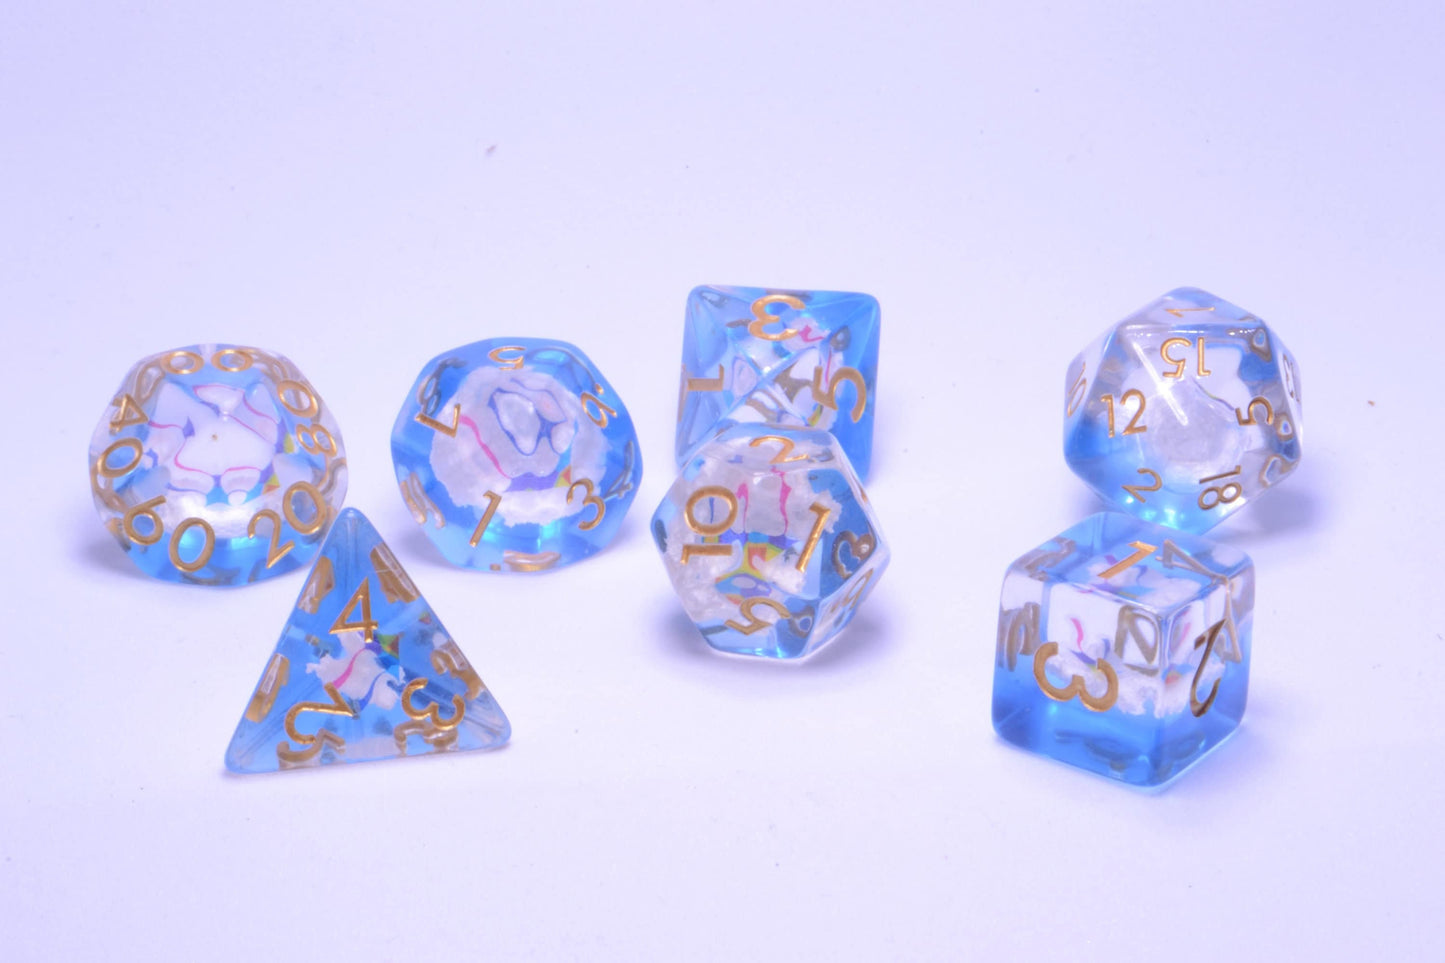 Skyward - Kite in the Clouds Soft Edge Resin D&D Dice Set With Gold Numbering - For Dungeons and Dragons - Gift Set